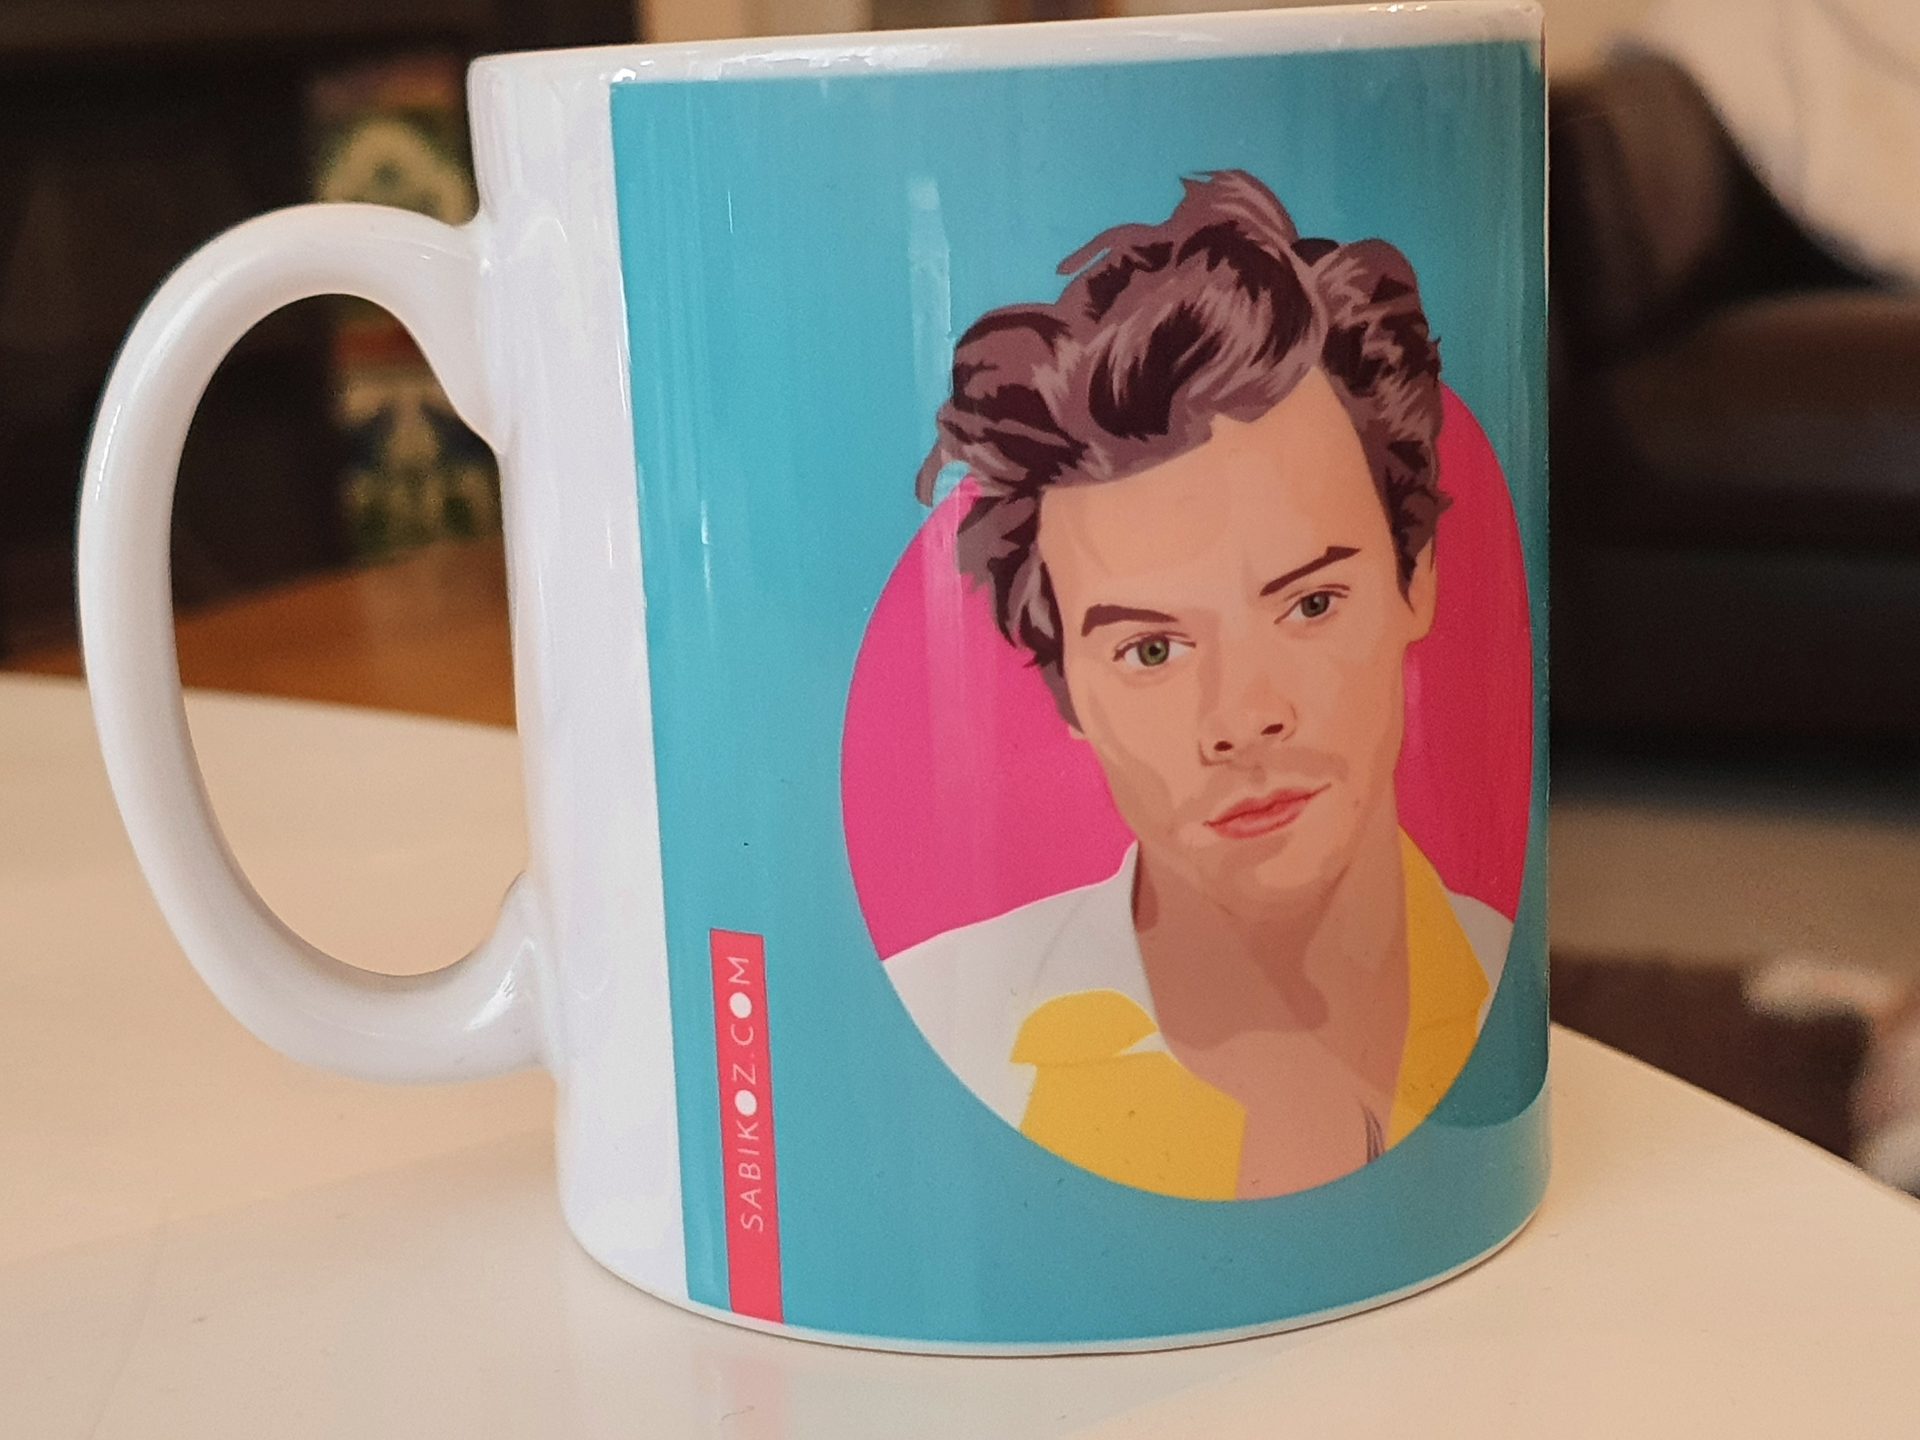 Harry Styles - Vintage, Victorian Style Painting 01 Coffee Mug by